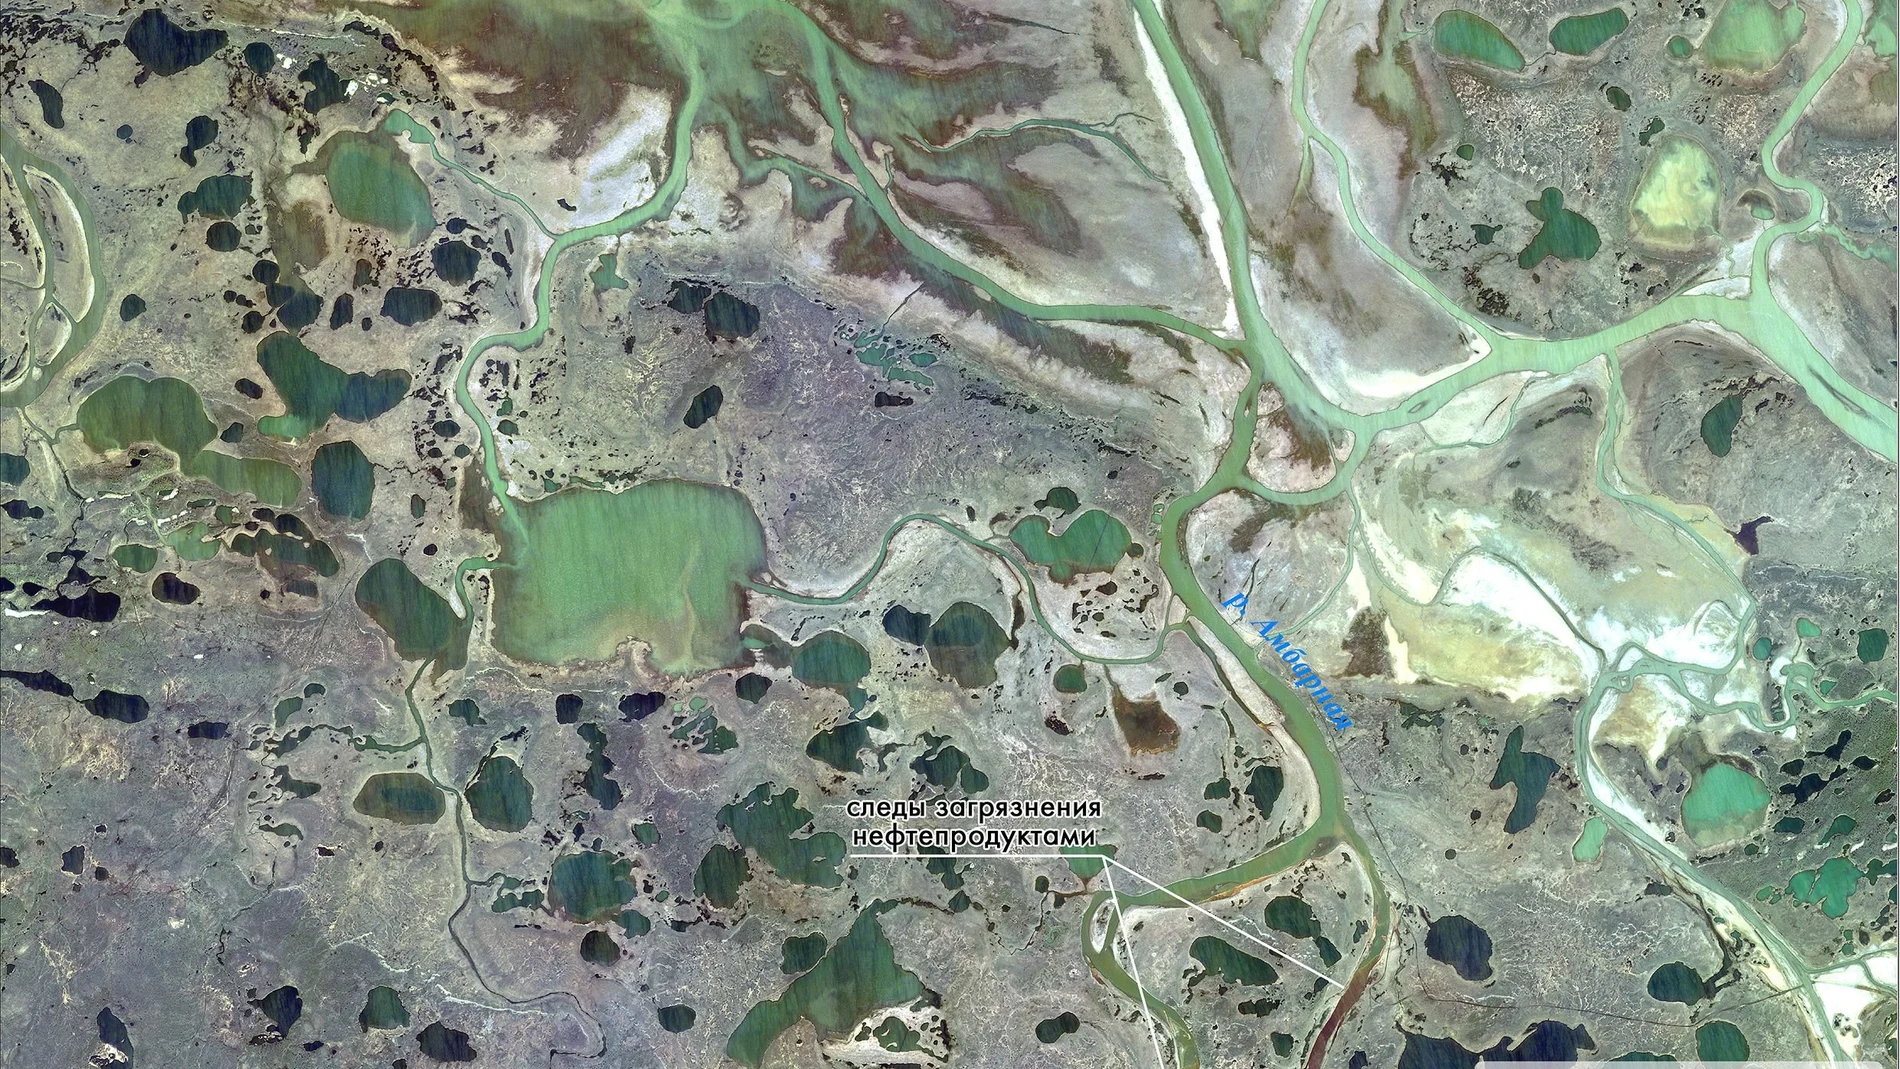 A satellite image shows Ambarnaya River after a diesel spill following an accident at a power plant outside Norilsk, in Krasnoyarsk region, Russia June 4, 2020. Picture taken June 4, 2020. Russian space agency Roscosmos/Handout via REUTERS ATTENTION EDITORS - THIS IMAGE HAS BEEN SUPPLIED BY A THIRD PARTY. MANDATORY CREDIT. PICTURE WATERMARKED AT SOURCE.